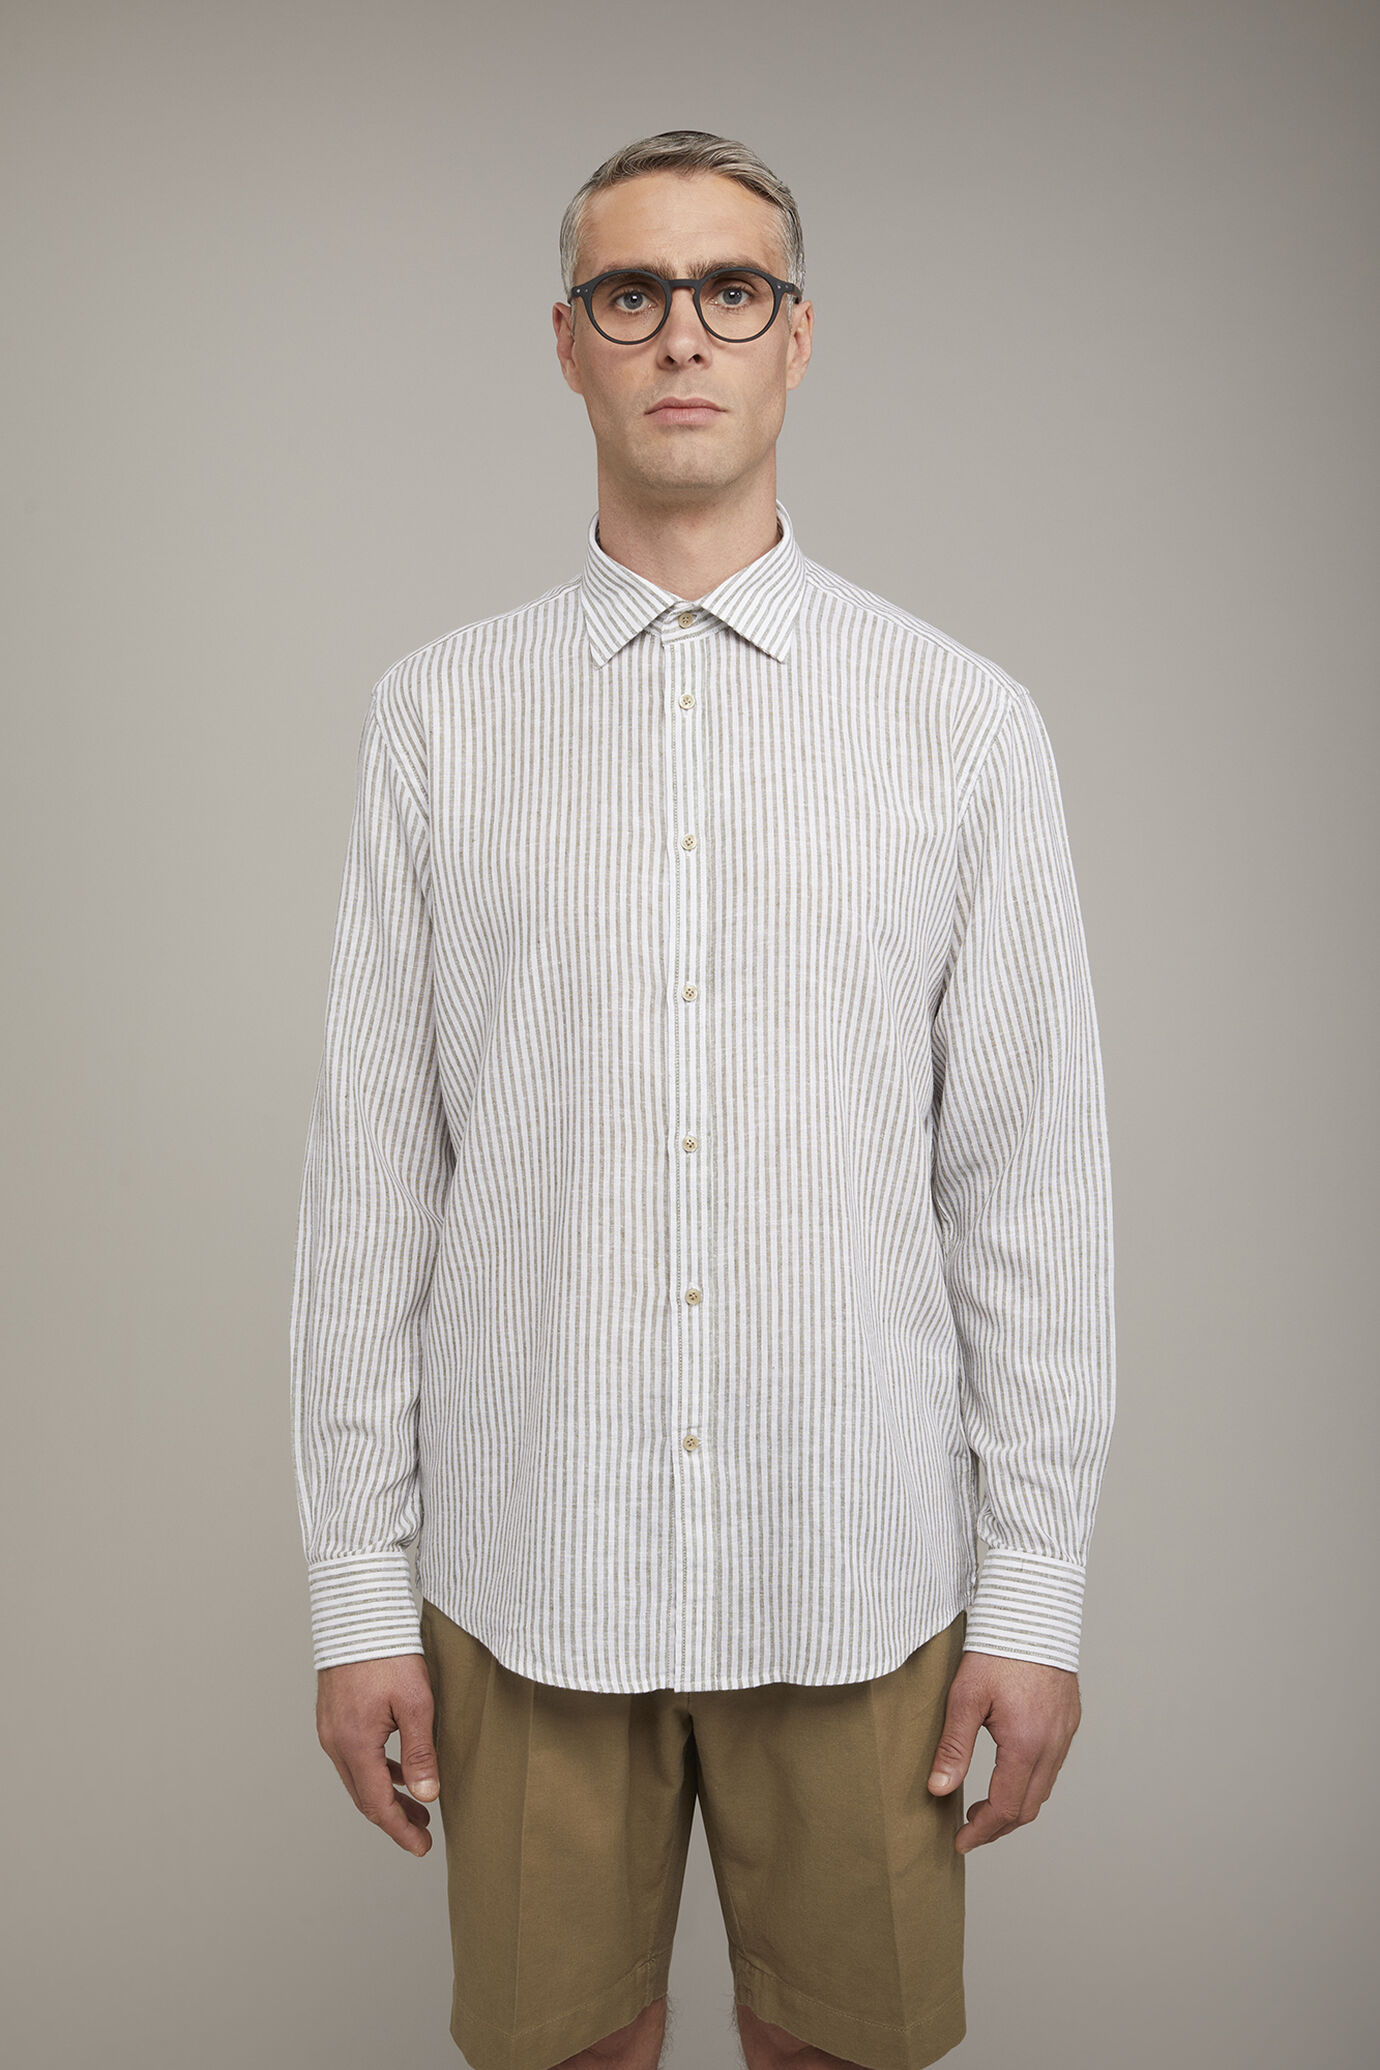 Men’s classic collar shirt in linen and striped cotton comfort fit